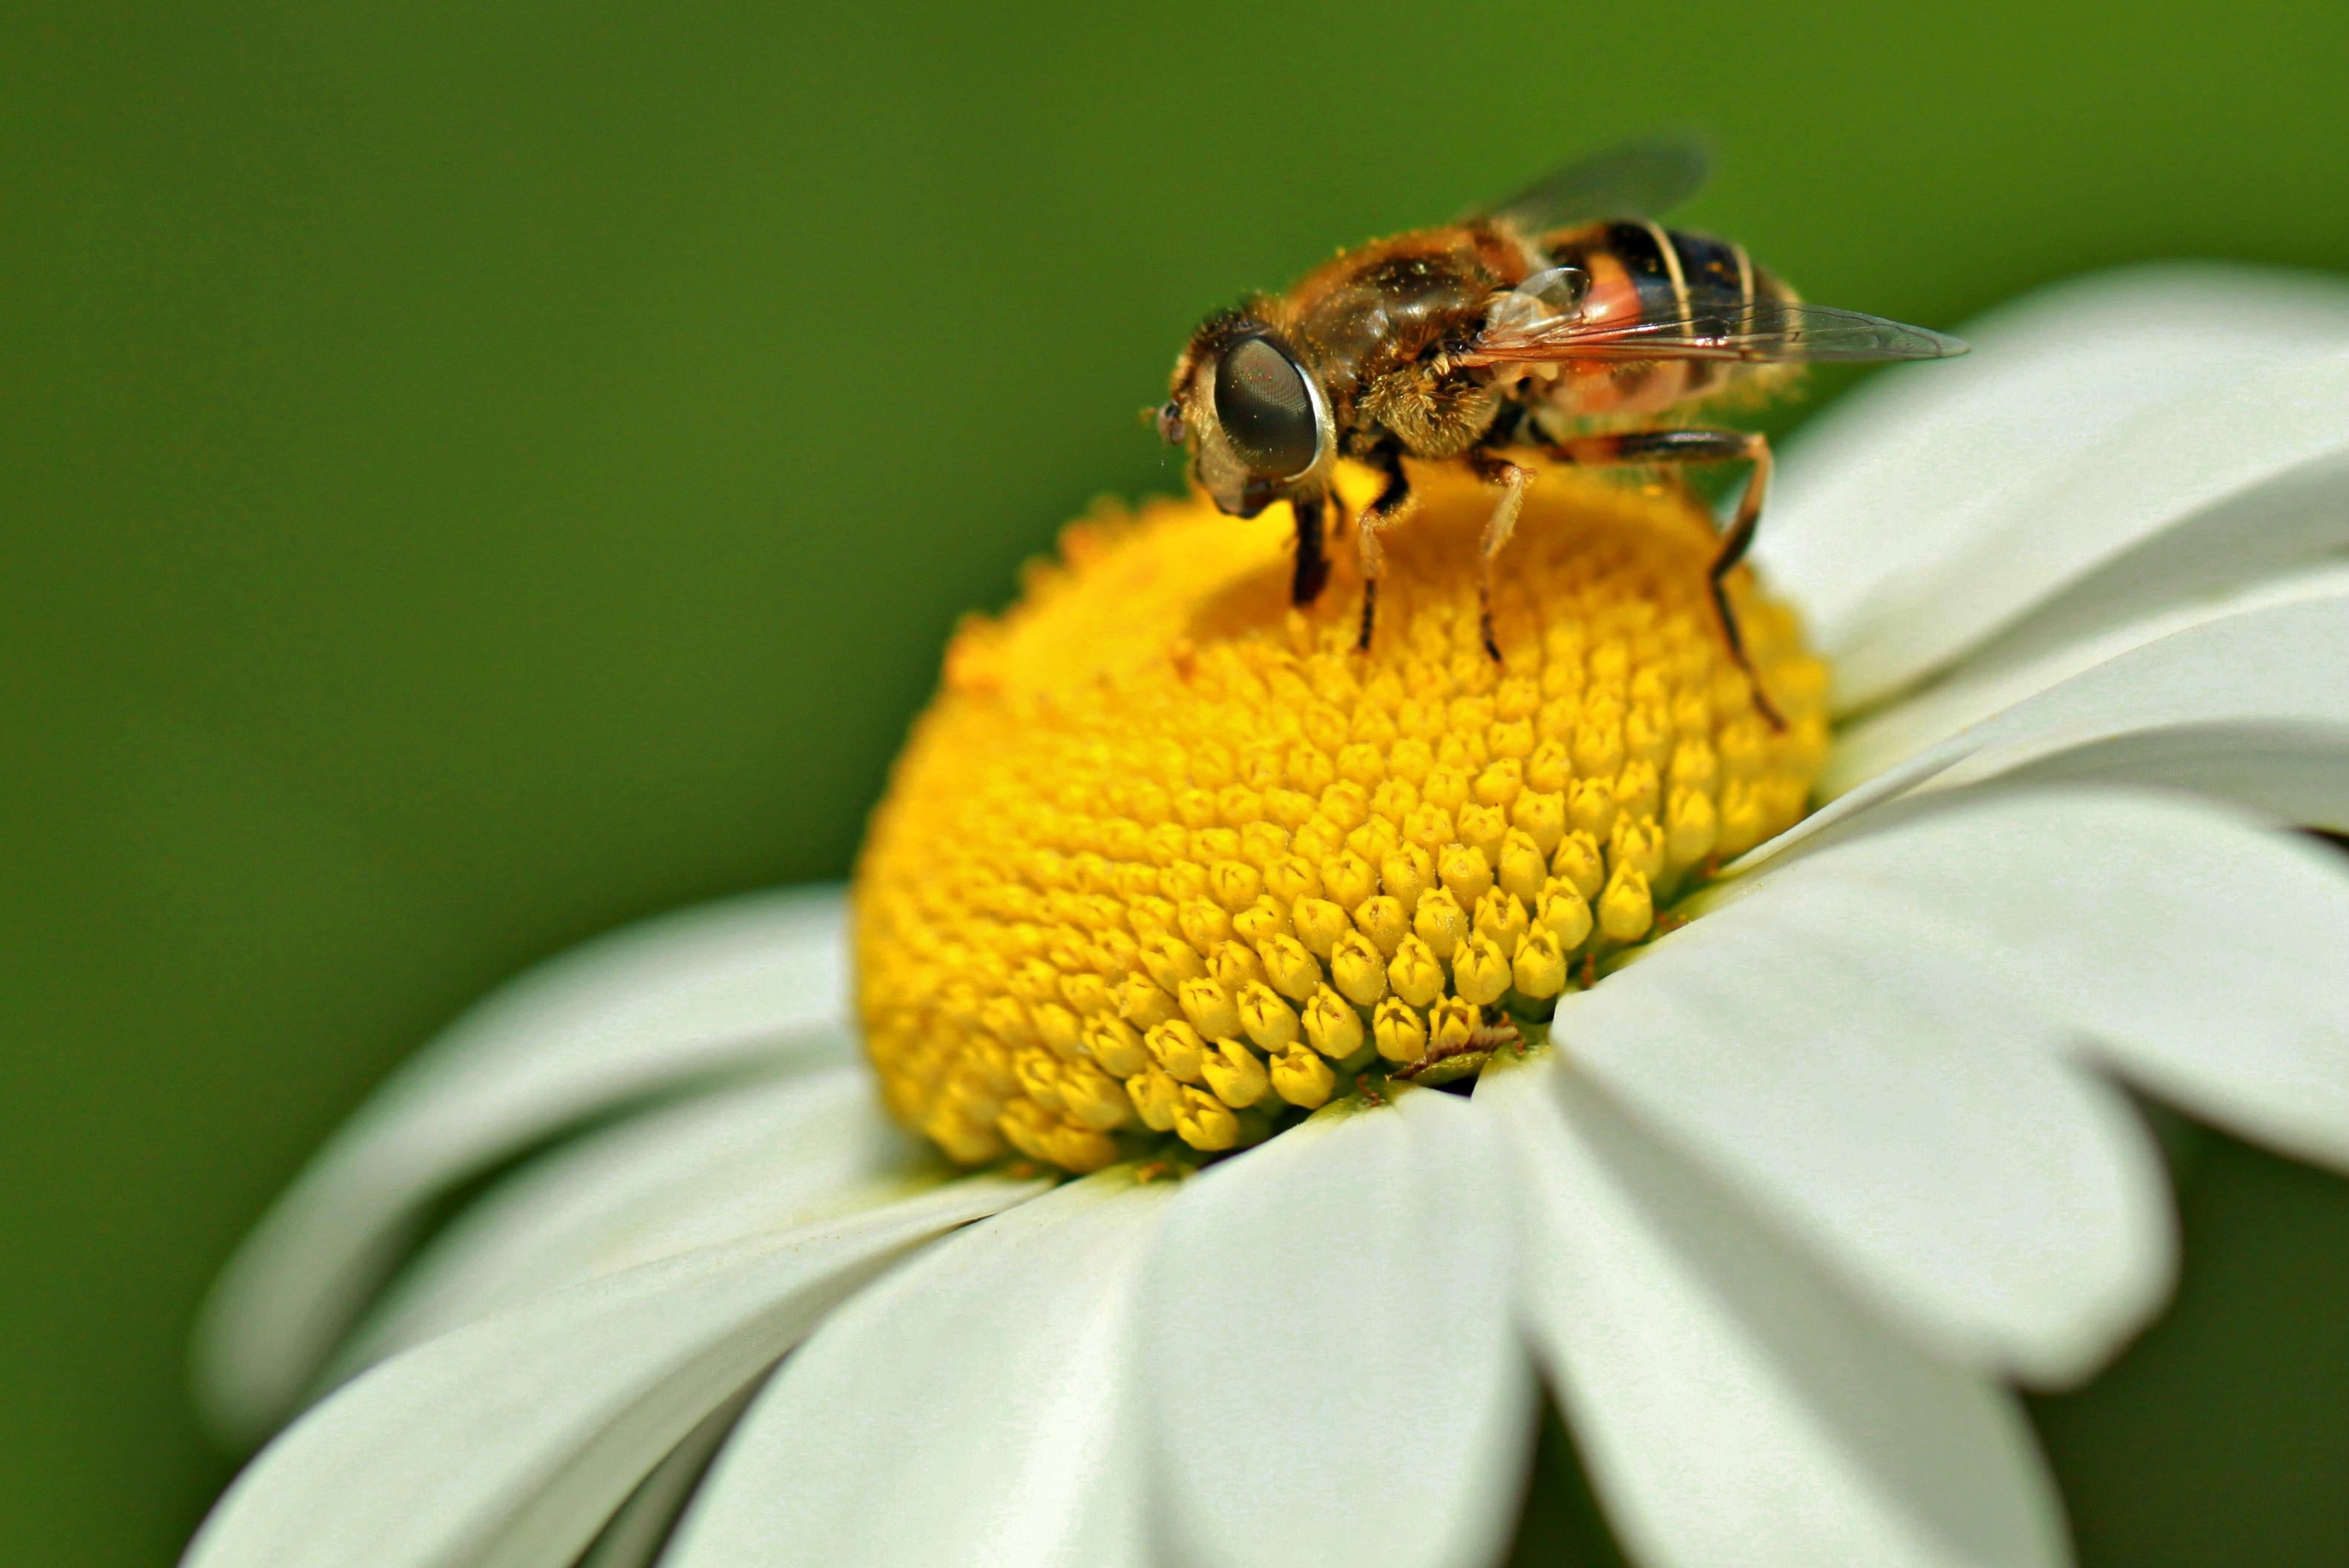 Insect, Hoverfly, Schwebbiene, Bee, flower, insect